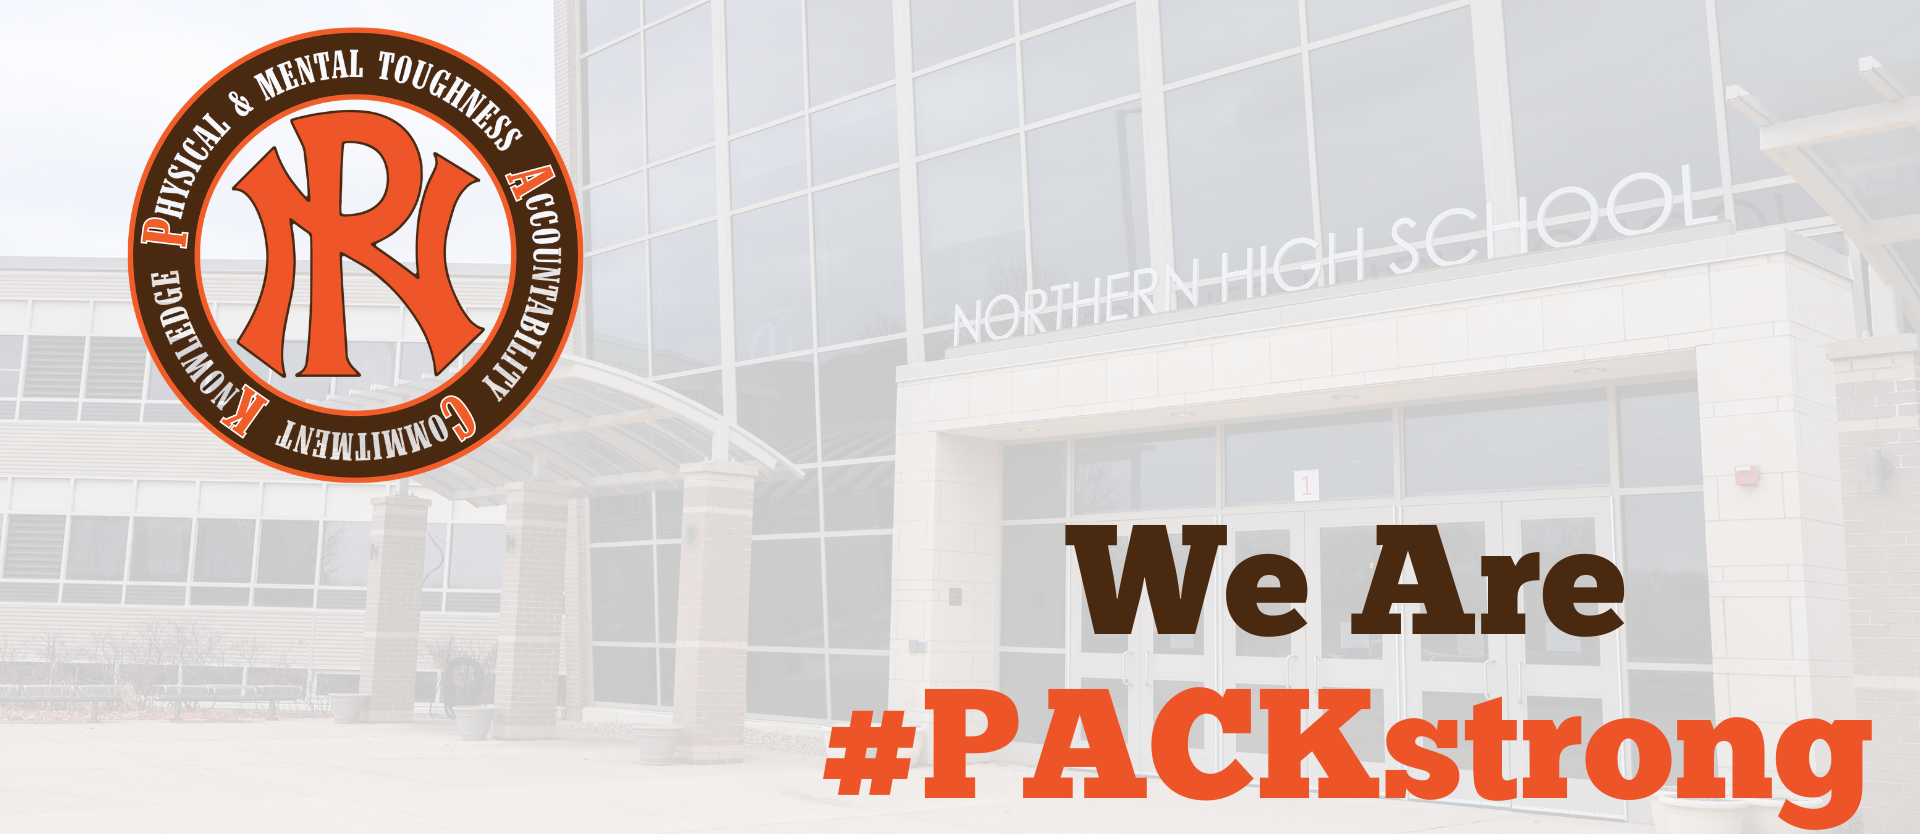 front of the school building with WE ARE PACKSTRONG and PN Packstrong logo